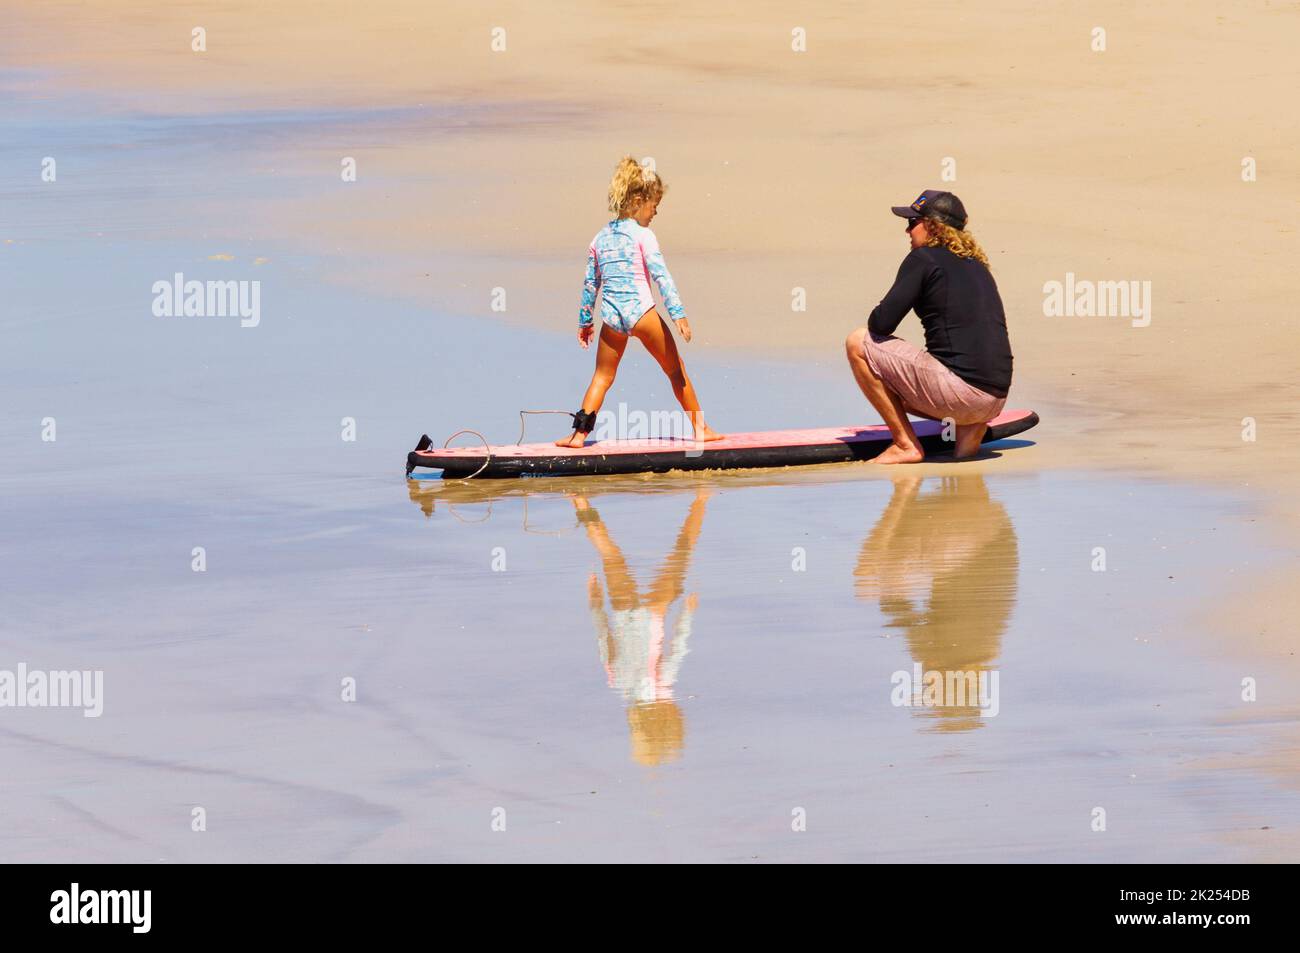 A father is teaching her young daughter to surf - Coffs Harbour, NSW, Australia Stock Photo